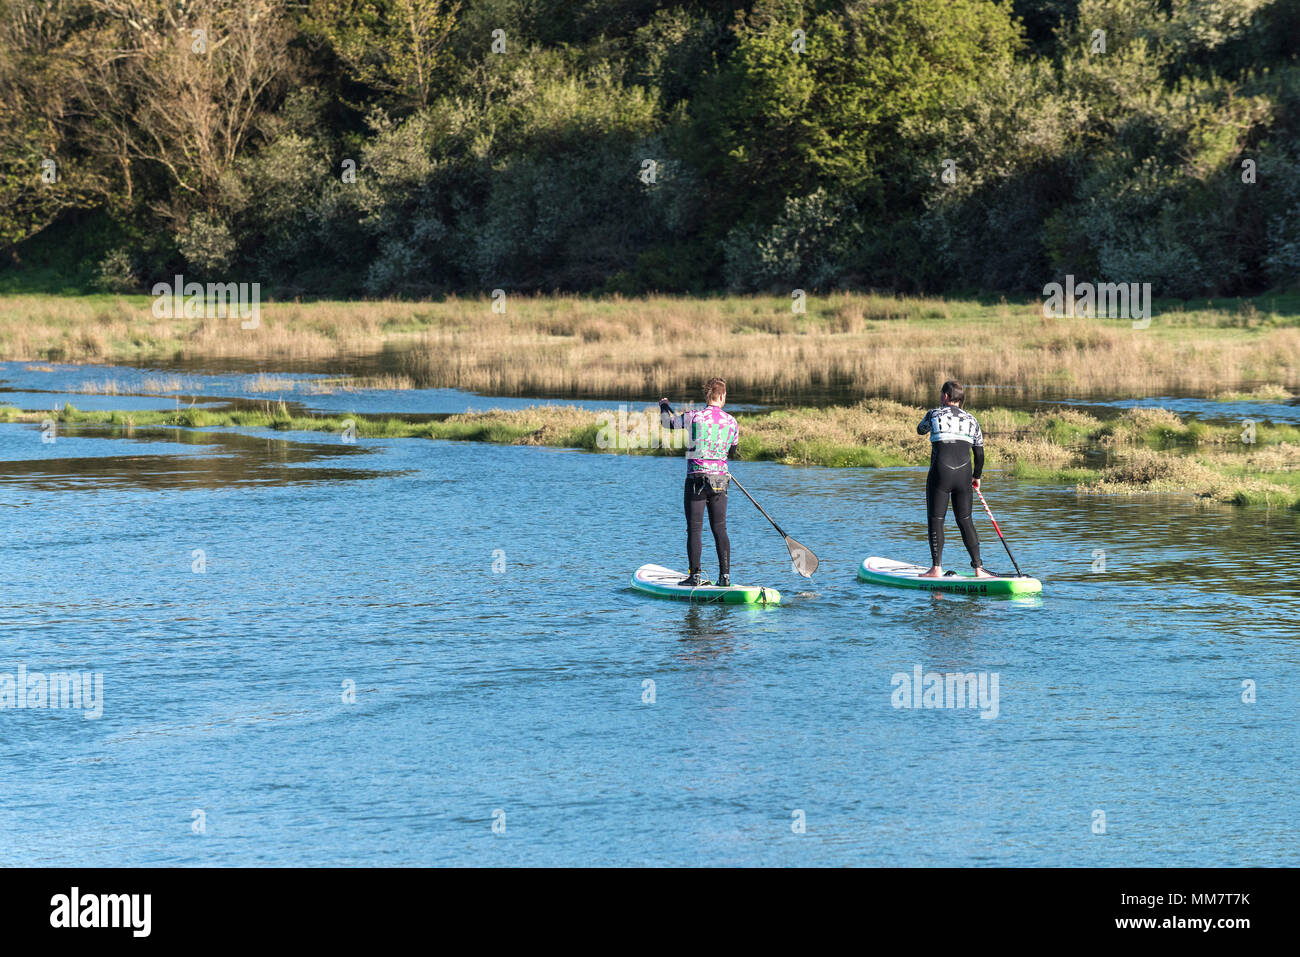 Stand up paddleboarders auf dem Fluss Gannel in Newquay Cornwall. Stockfoto